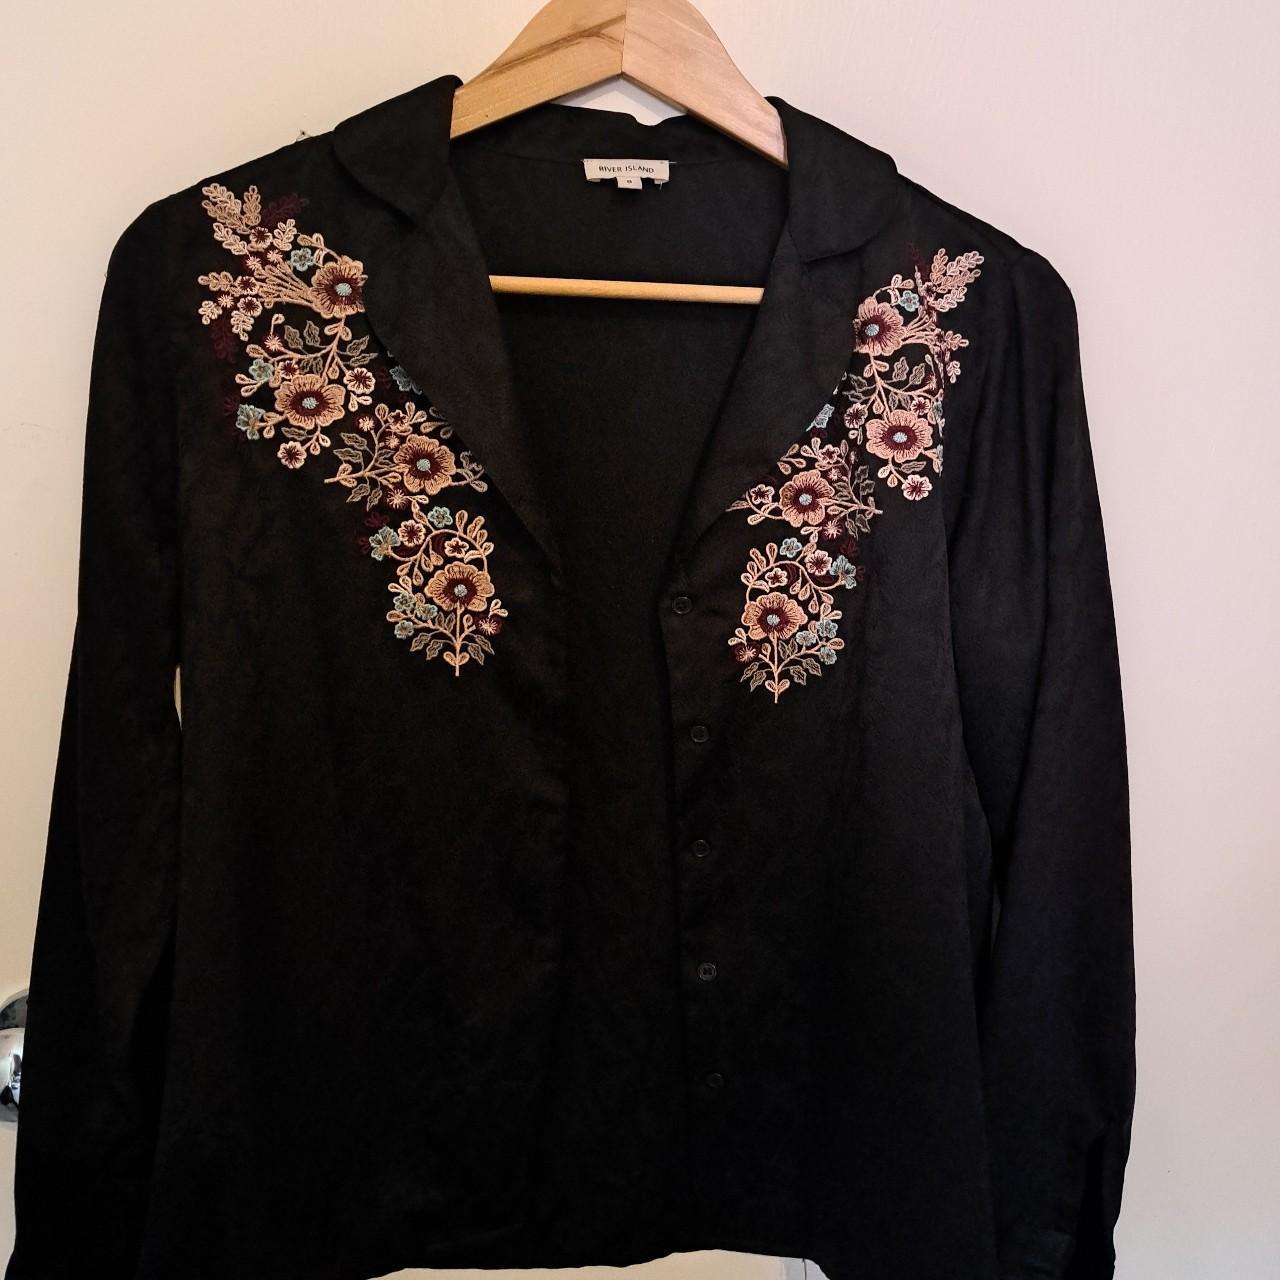 River Island black shirt with floral embroidery in... - Depop